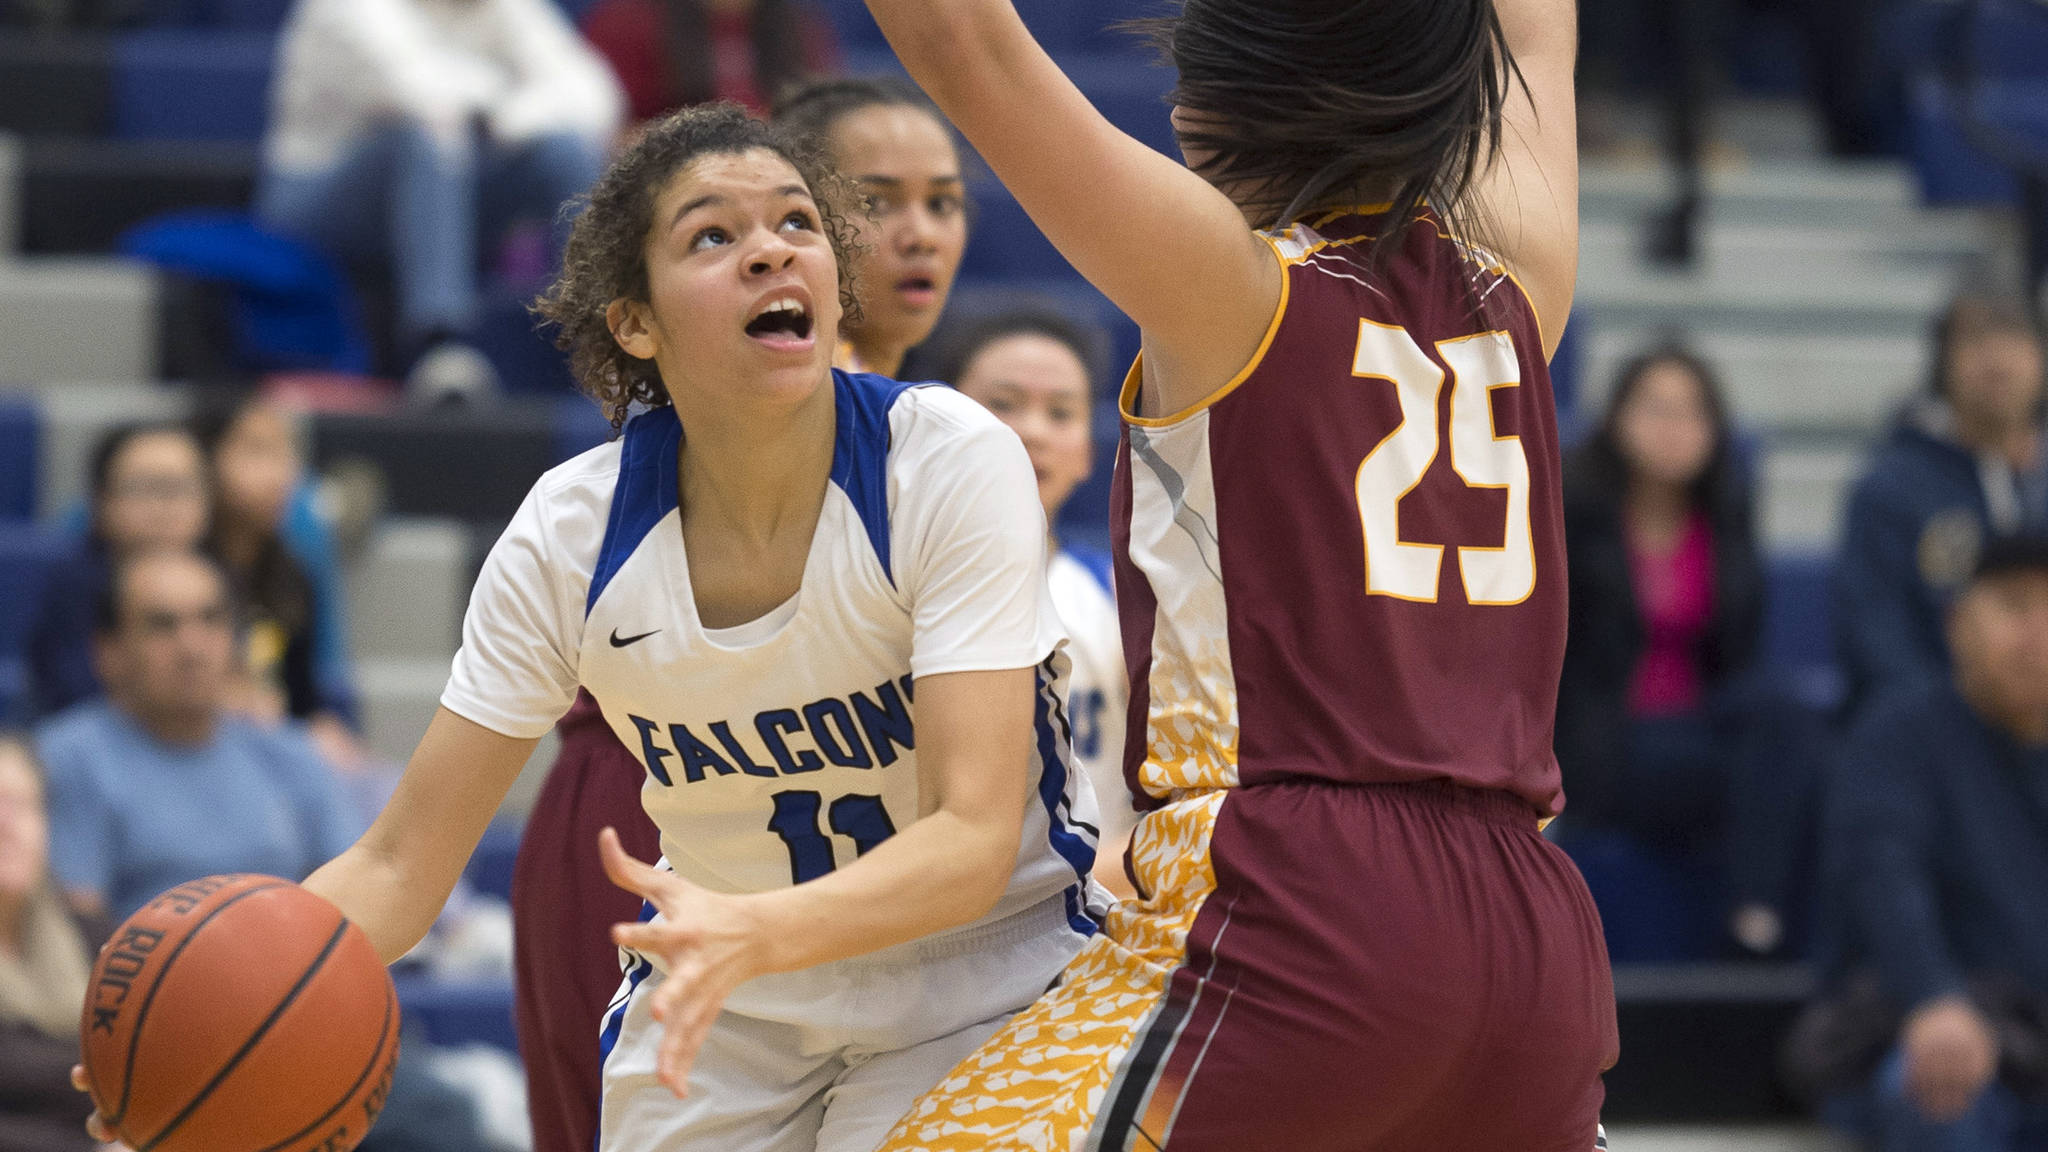 Thunder Mountain’s Tzadi Hauck looks to the basket against Mt. Edgecumbe’s Paige Goodwin at TMHS on Friday, Jan. 26, 2018. Mt. Edgecumbe won 52-22. (Michael Penn | Juneau Empire)